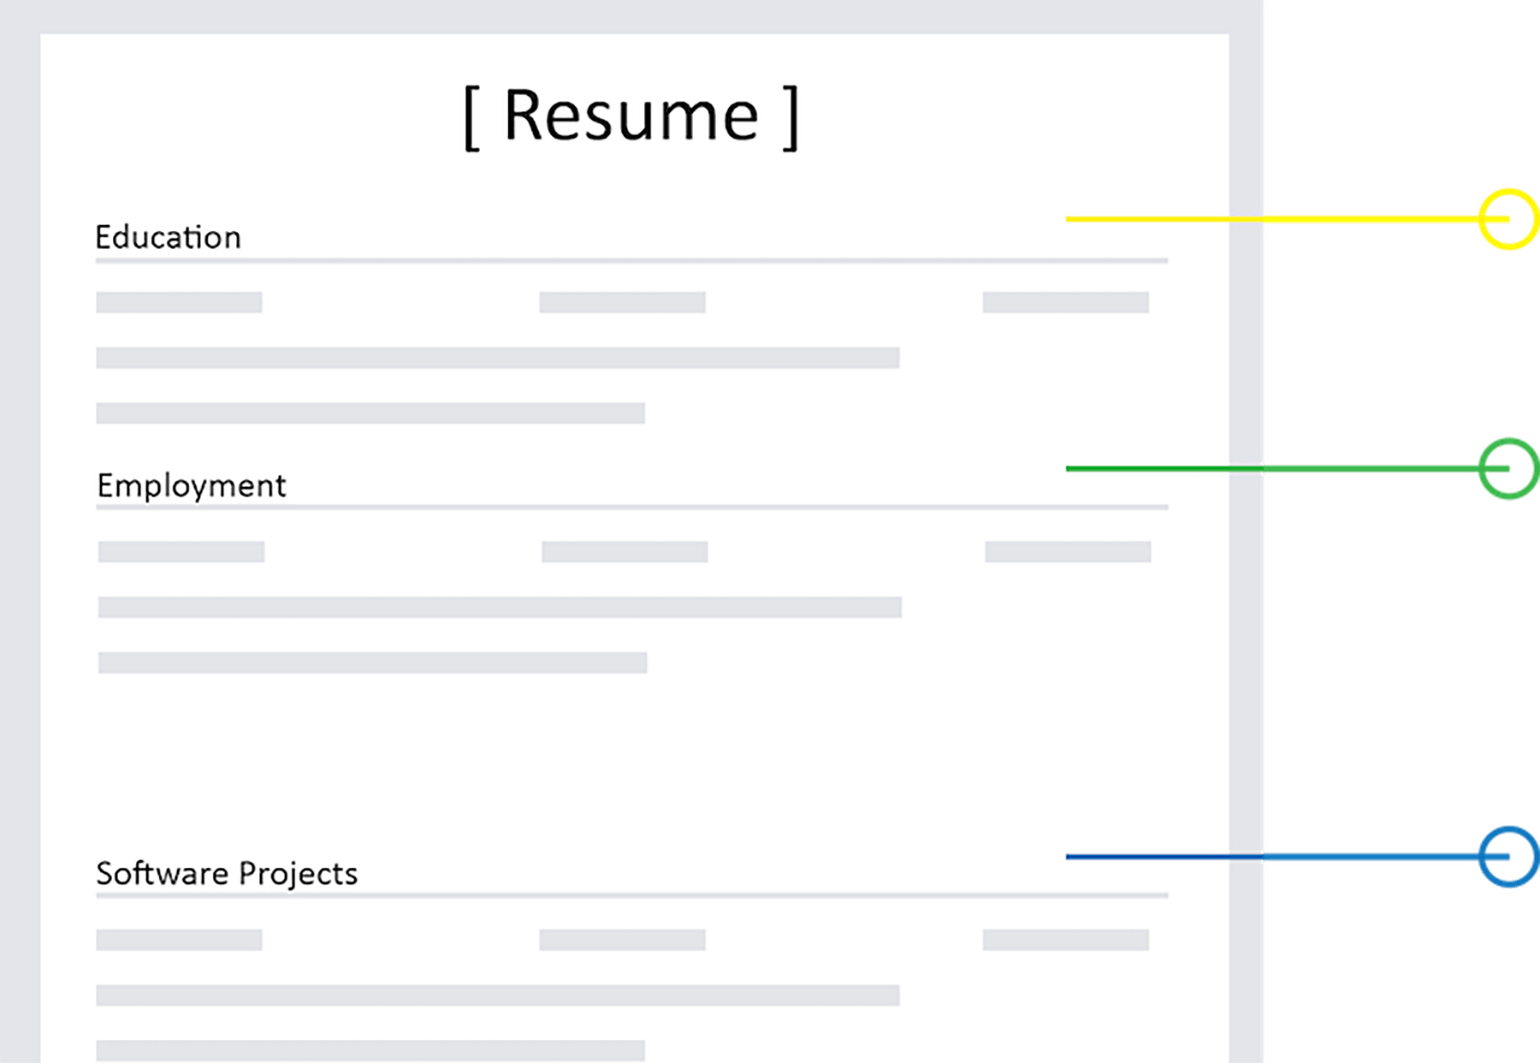 : Digital image of a resume with section headings “Education”, “Employment” and “Software Projects” labeled. Yellow, green, and blue label markers are drawn and pointed towards each section heading.